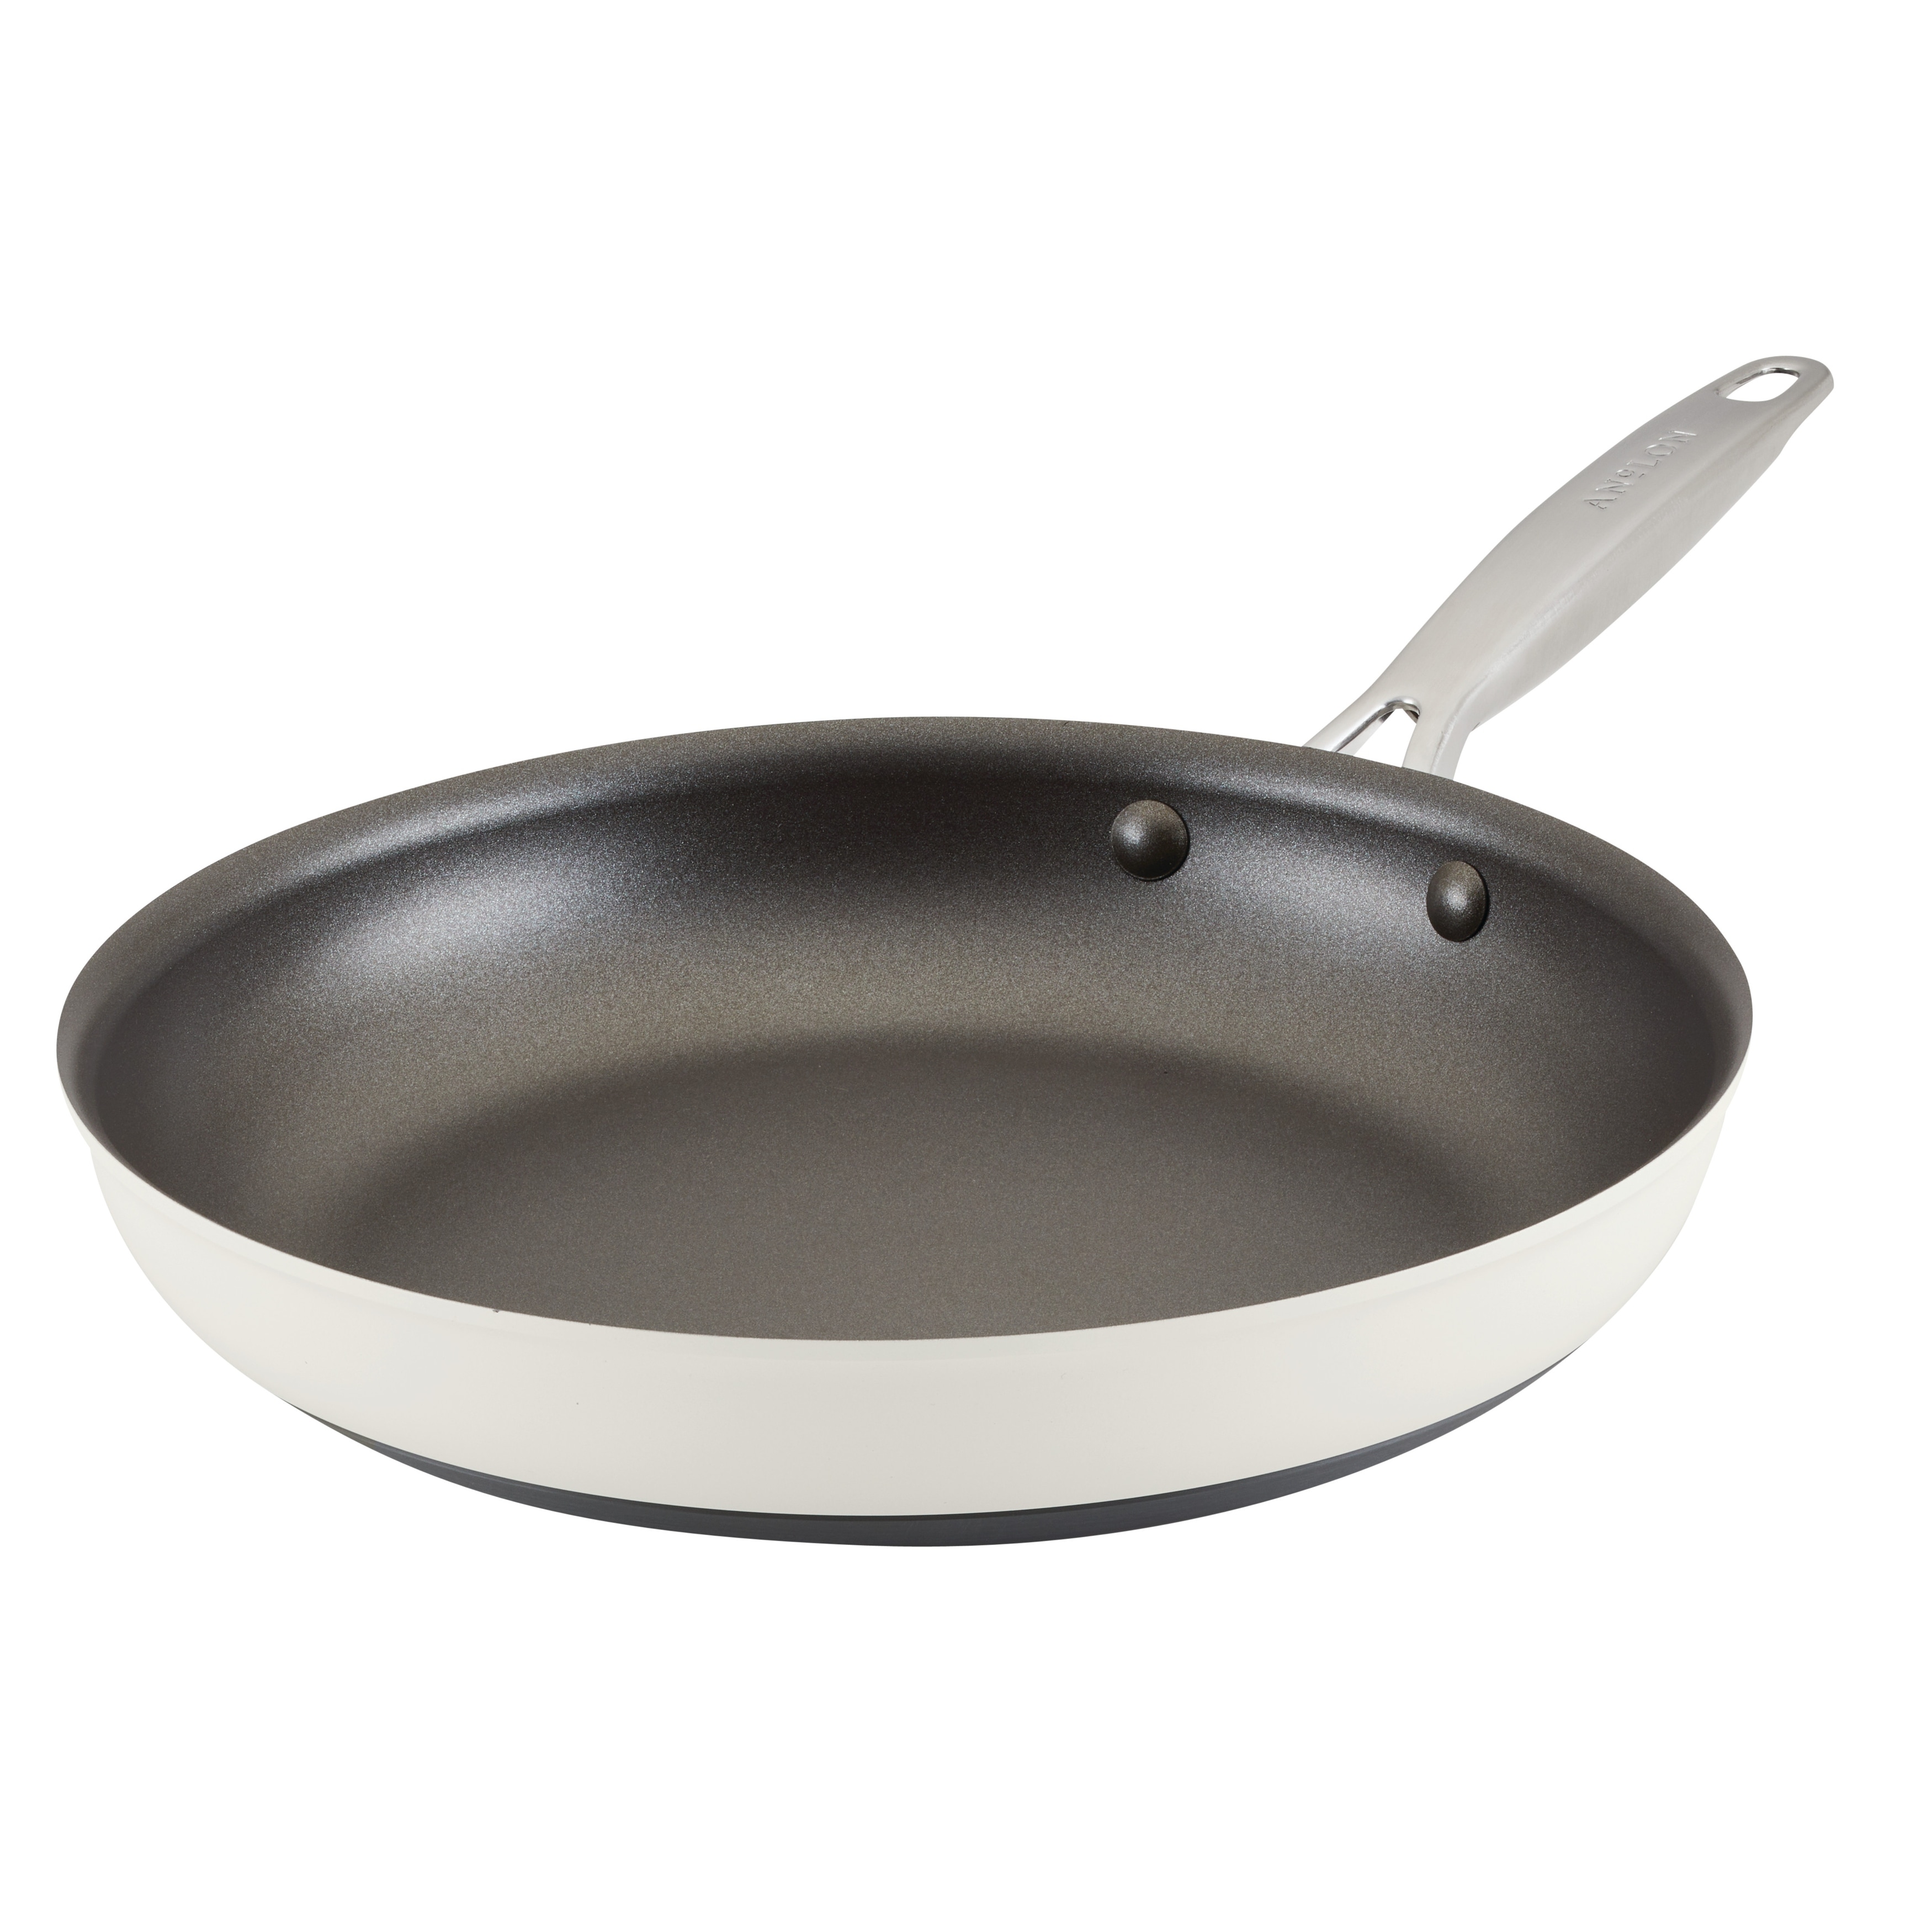 https://ak1.ostkcdn.com/images/products/is/images/direct/bd54e62e0455bf4133a4c981d5fc0b22946e0387/Anolon-Achieve-Hard-Anodized-Nonstick-Frying-Pan%2C-12-Inch.jpg